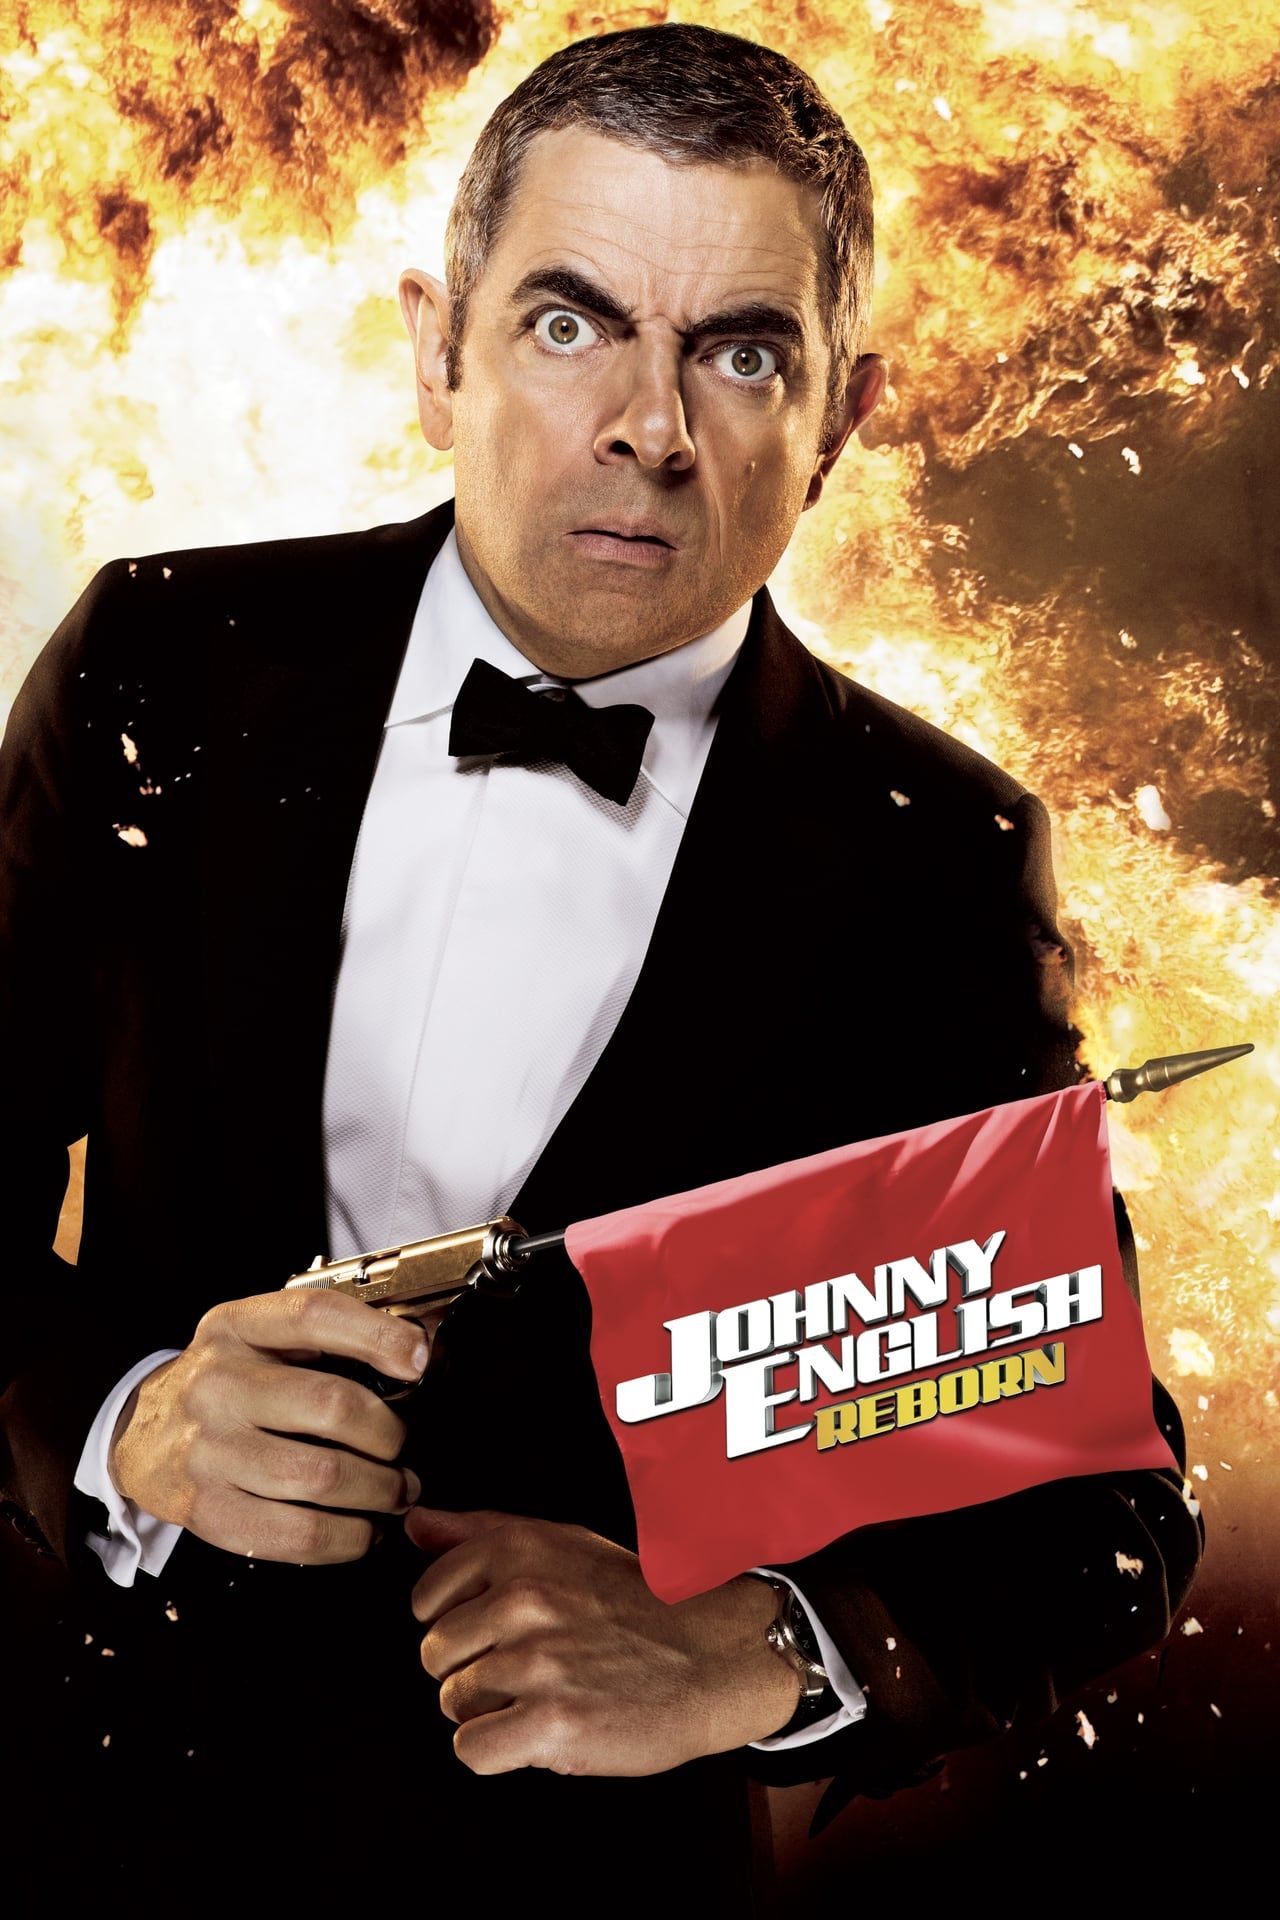 Johnny English Reborn Movie Poster with Rowan Atkinson Holding a Gun in Front of an Explosion